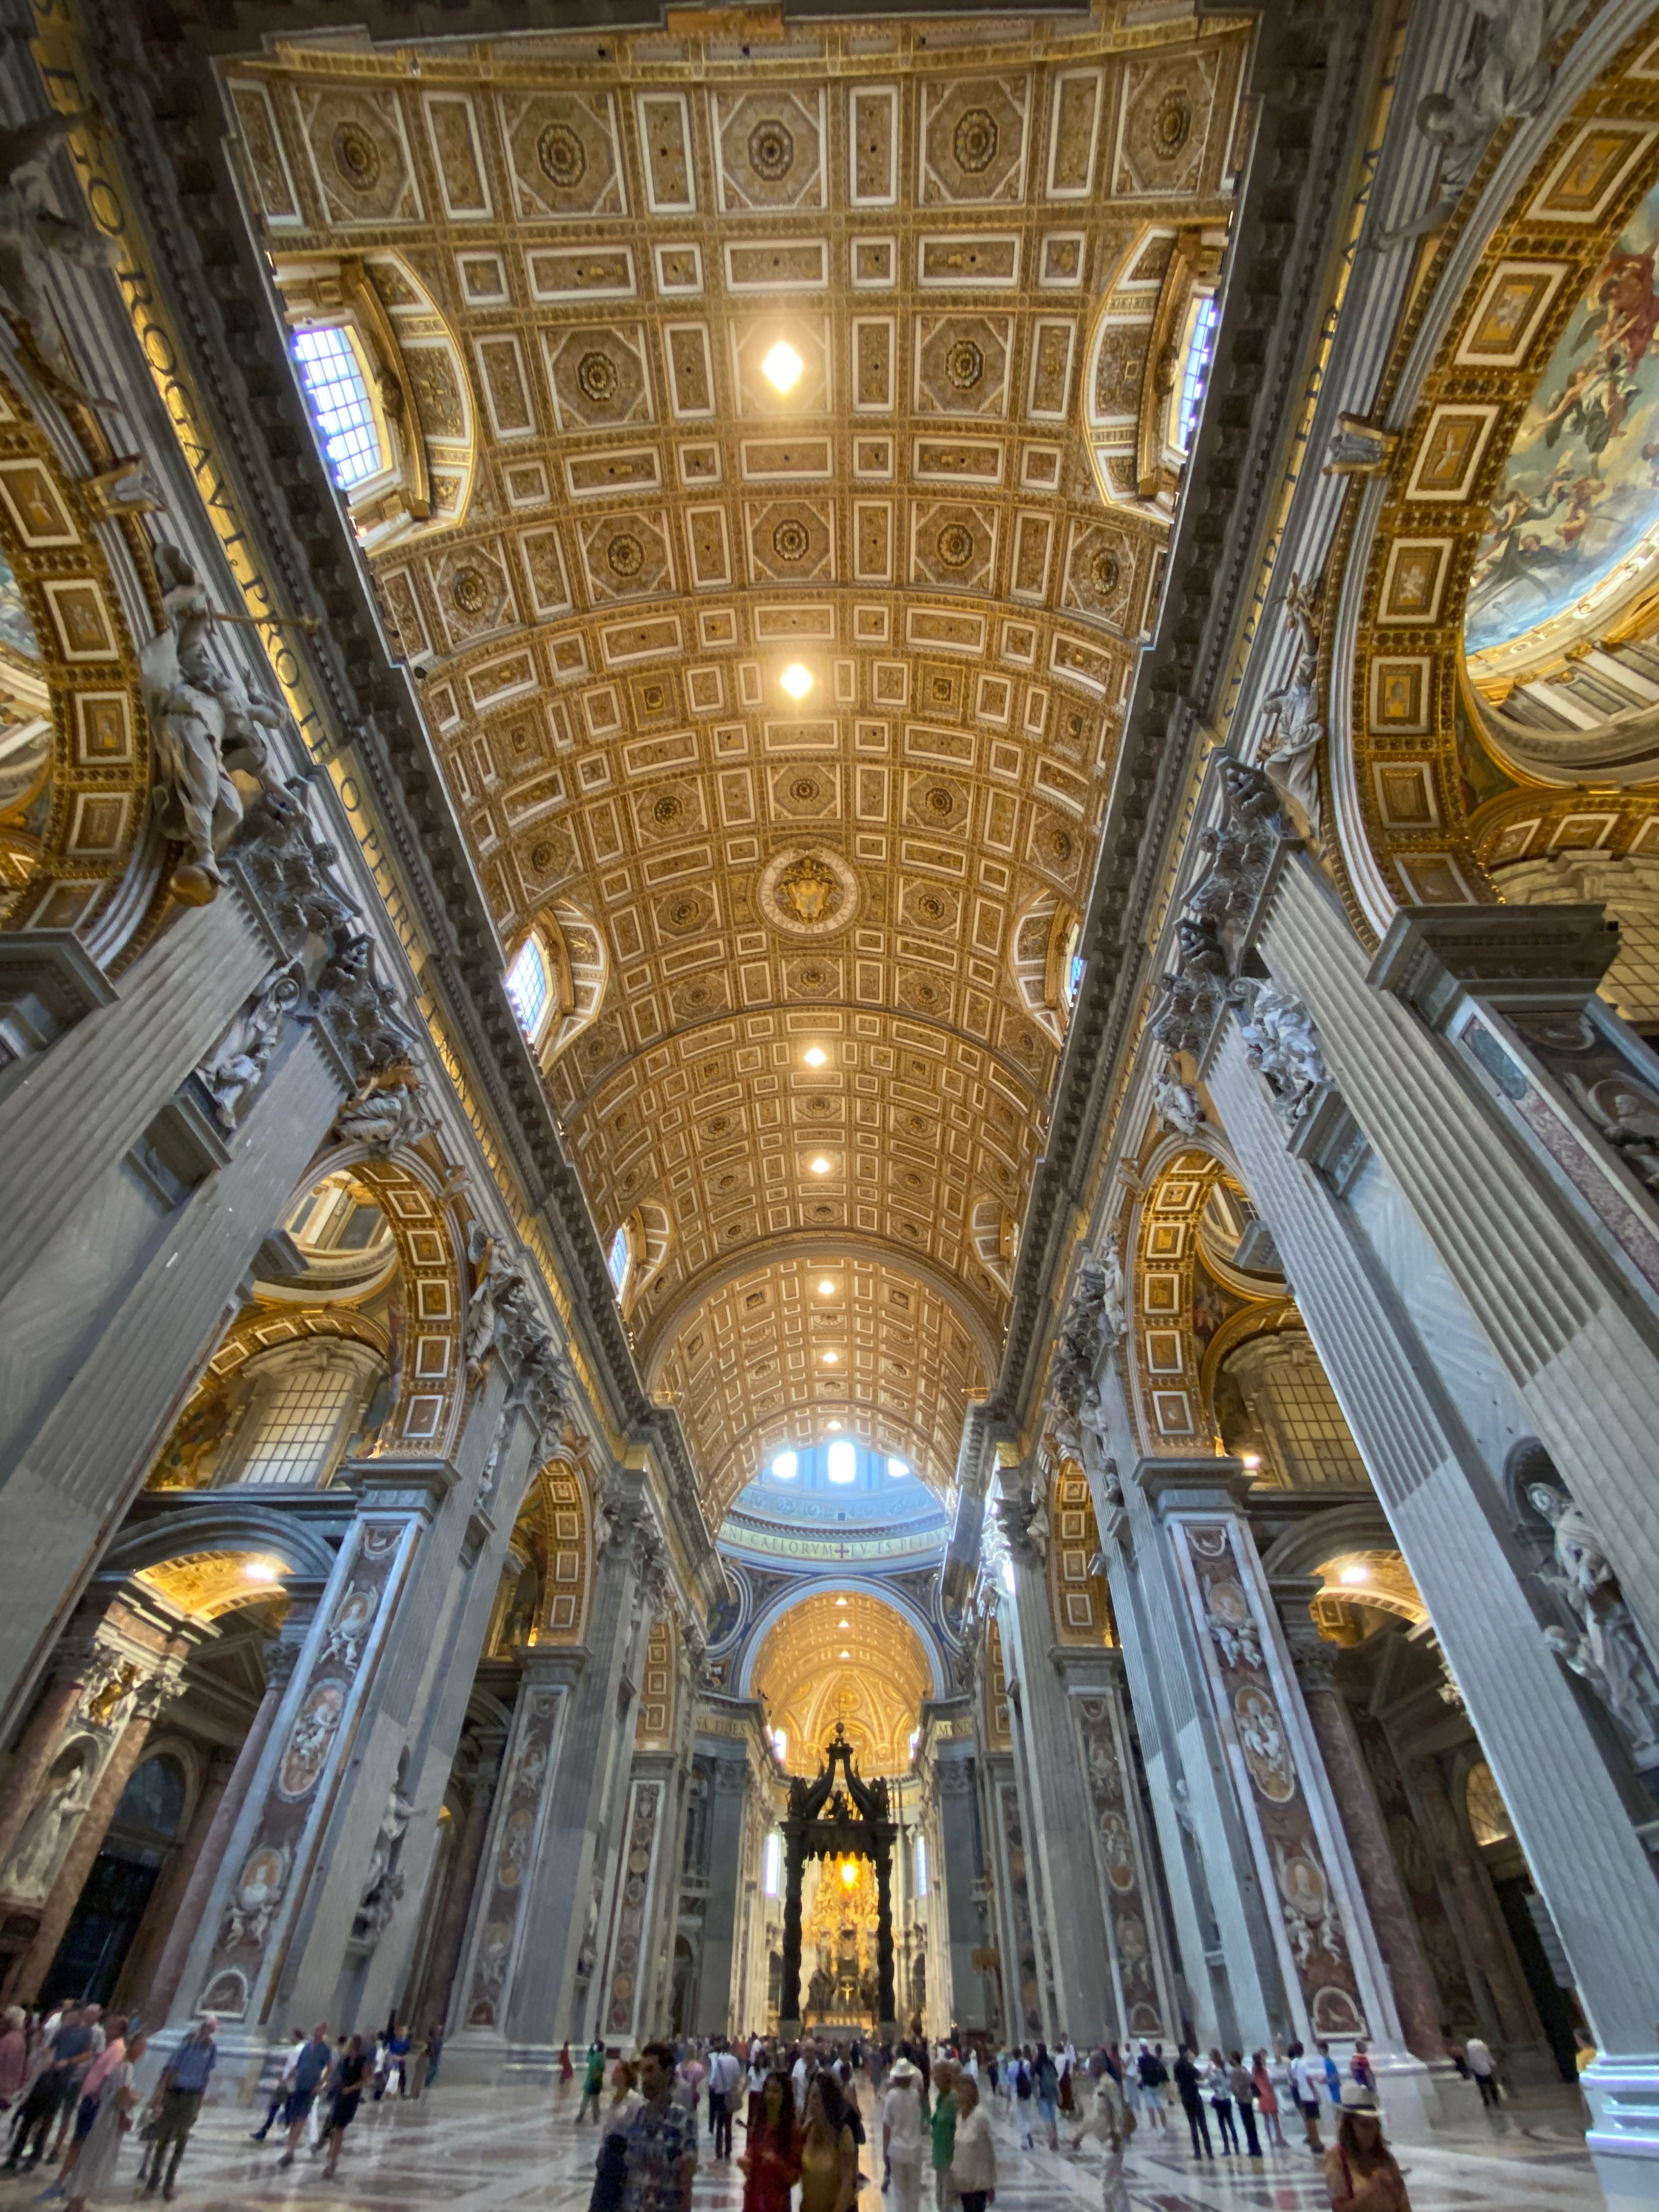 A photo showing the scale of St. Peter's Basilica.